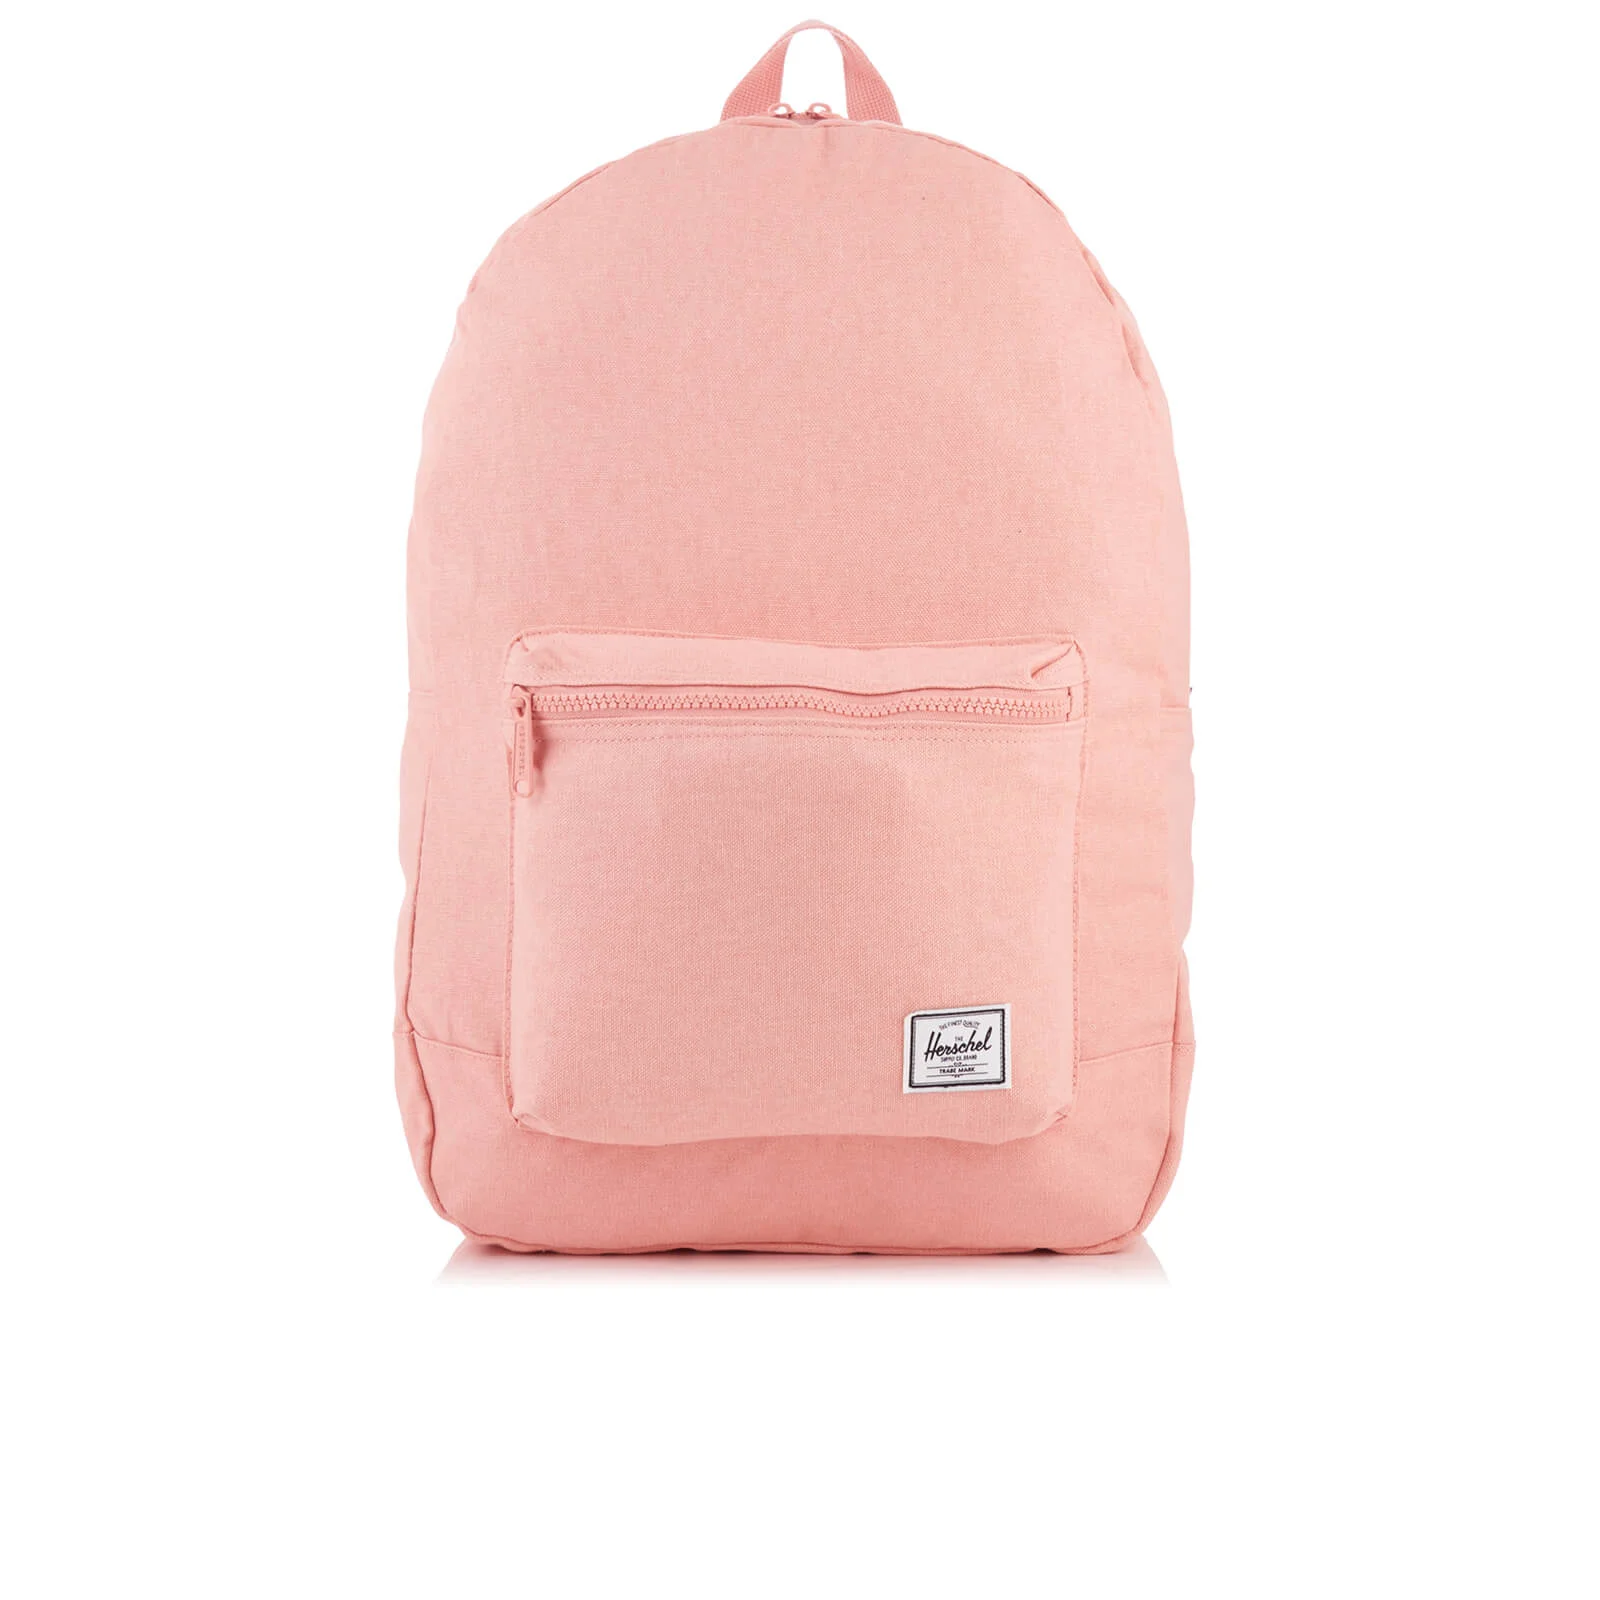 Herschel Supply Co. Daypack Backpack - Apricot Blush Image 1